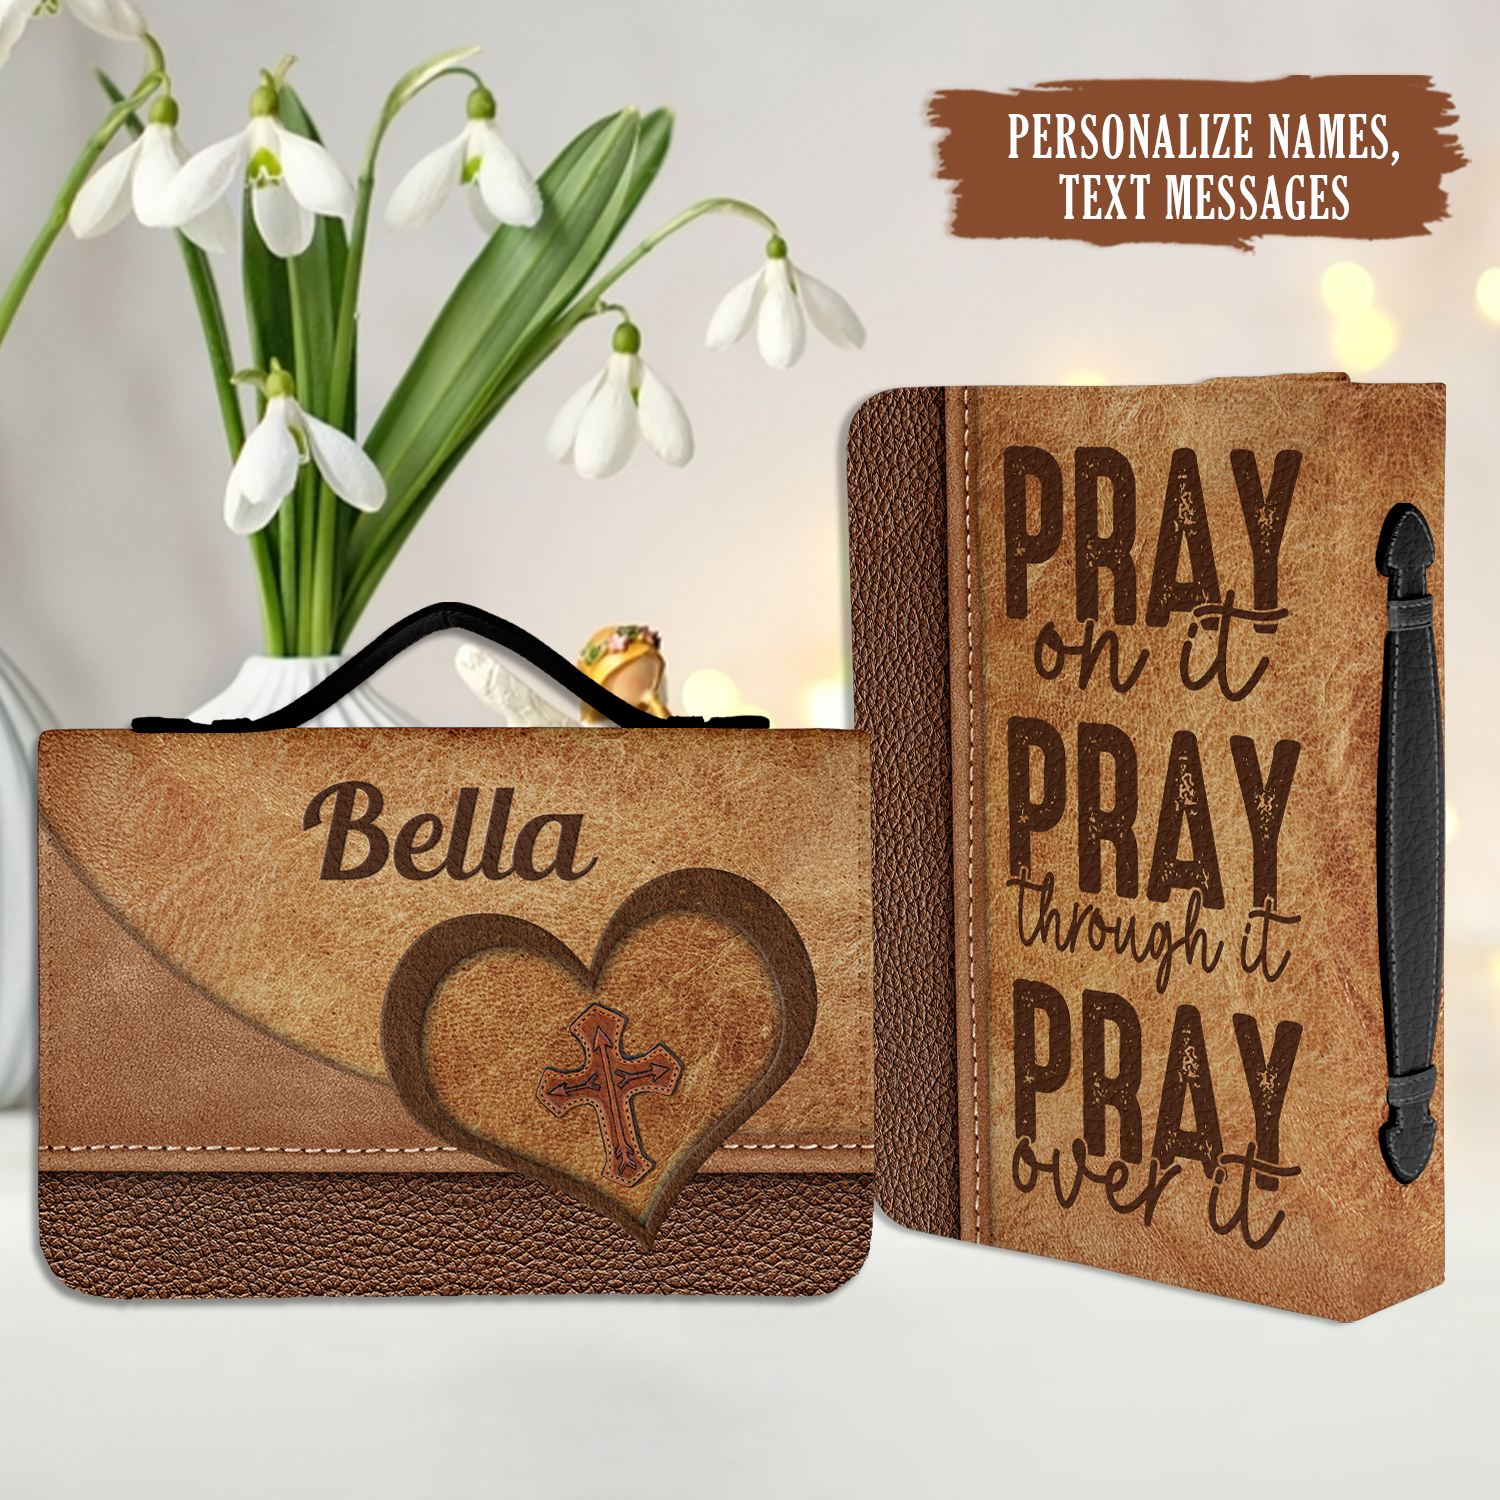 Leather Heart Cross Pray On It Christian Personalized Bible Cover